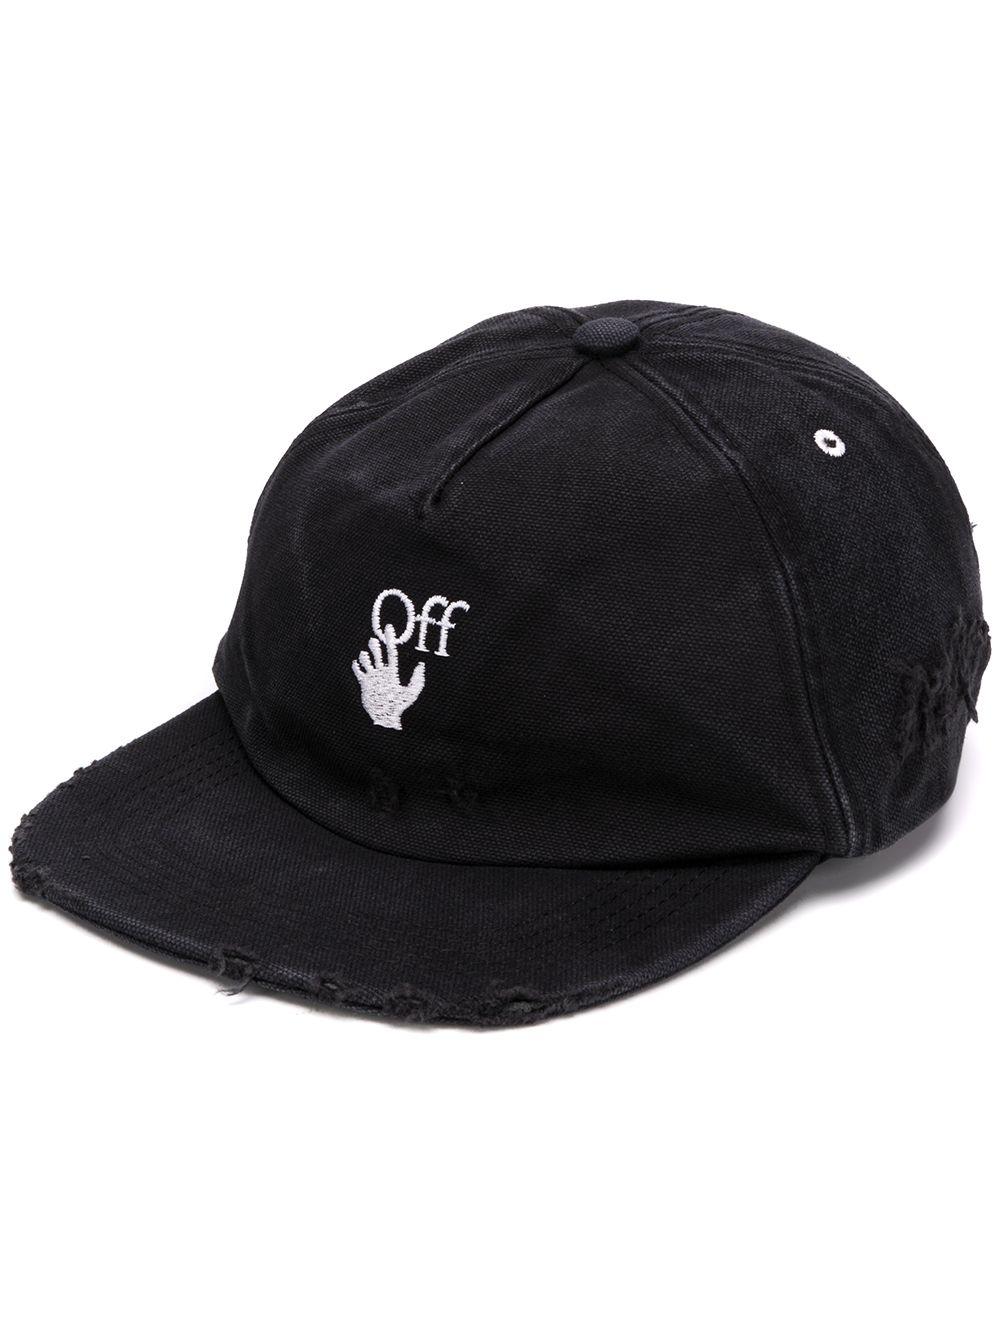 Off-White Virgil Abloh Distressed Embroidered Cap in | Lyst